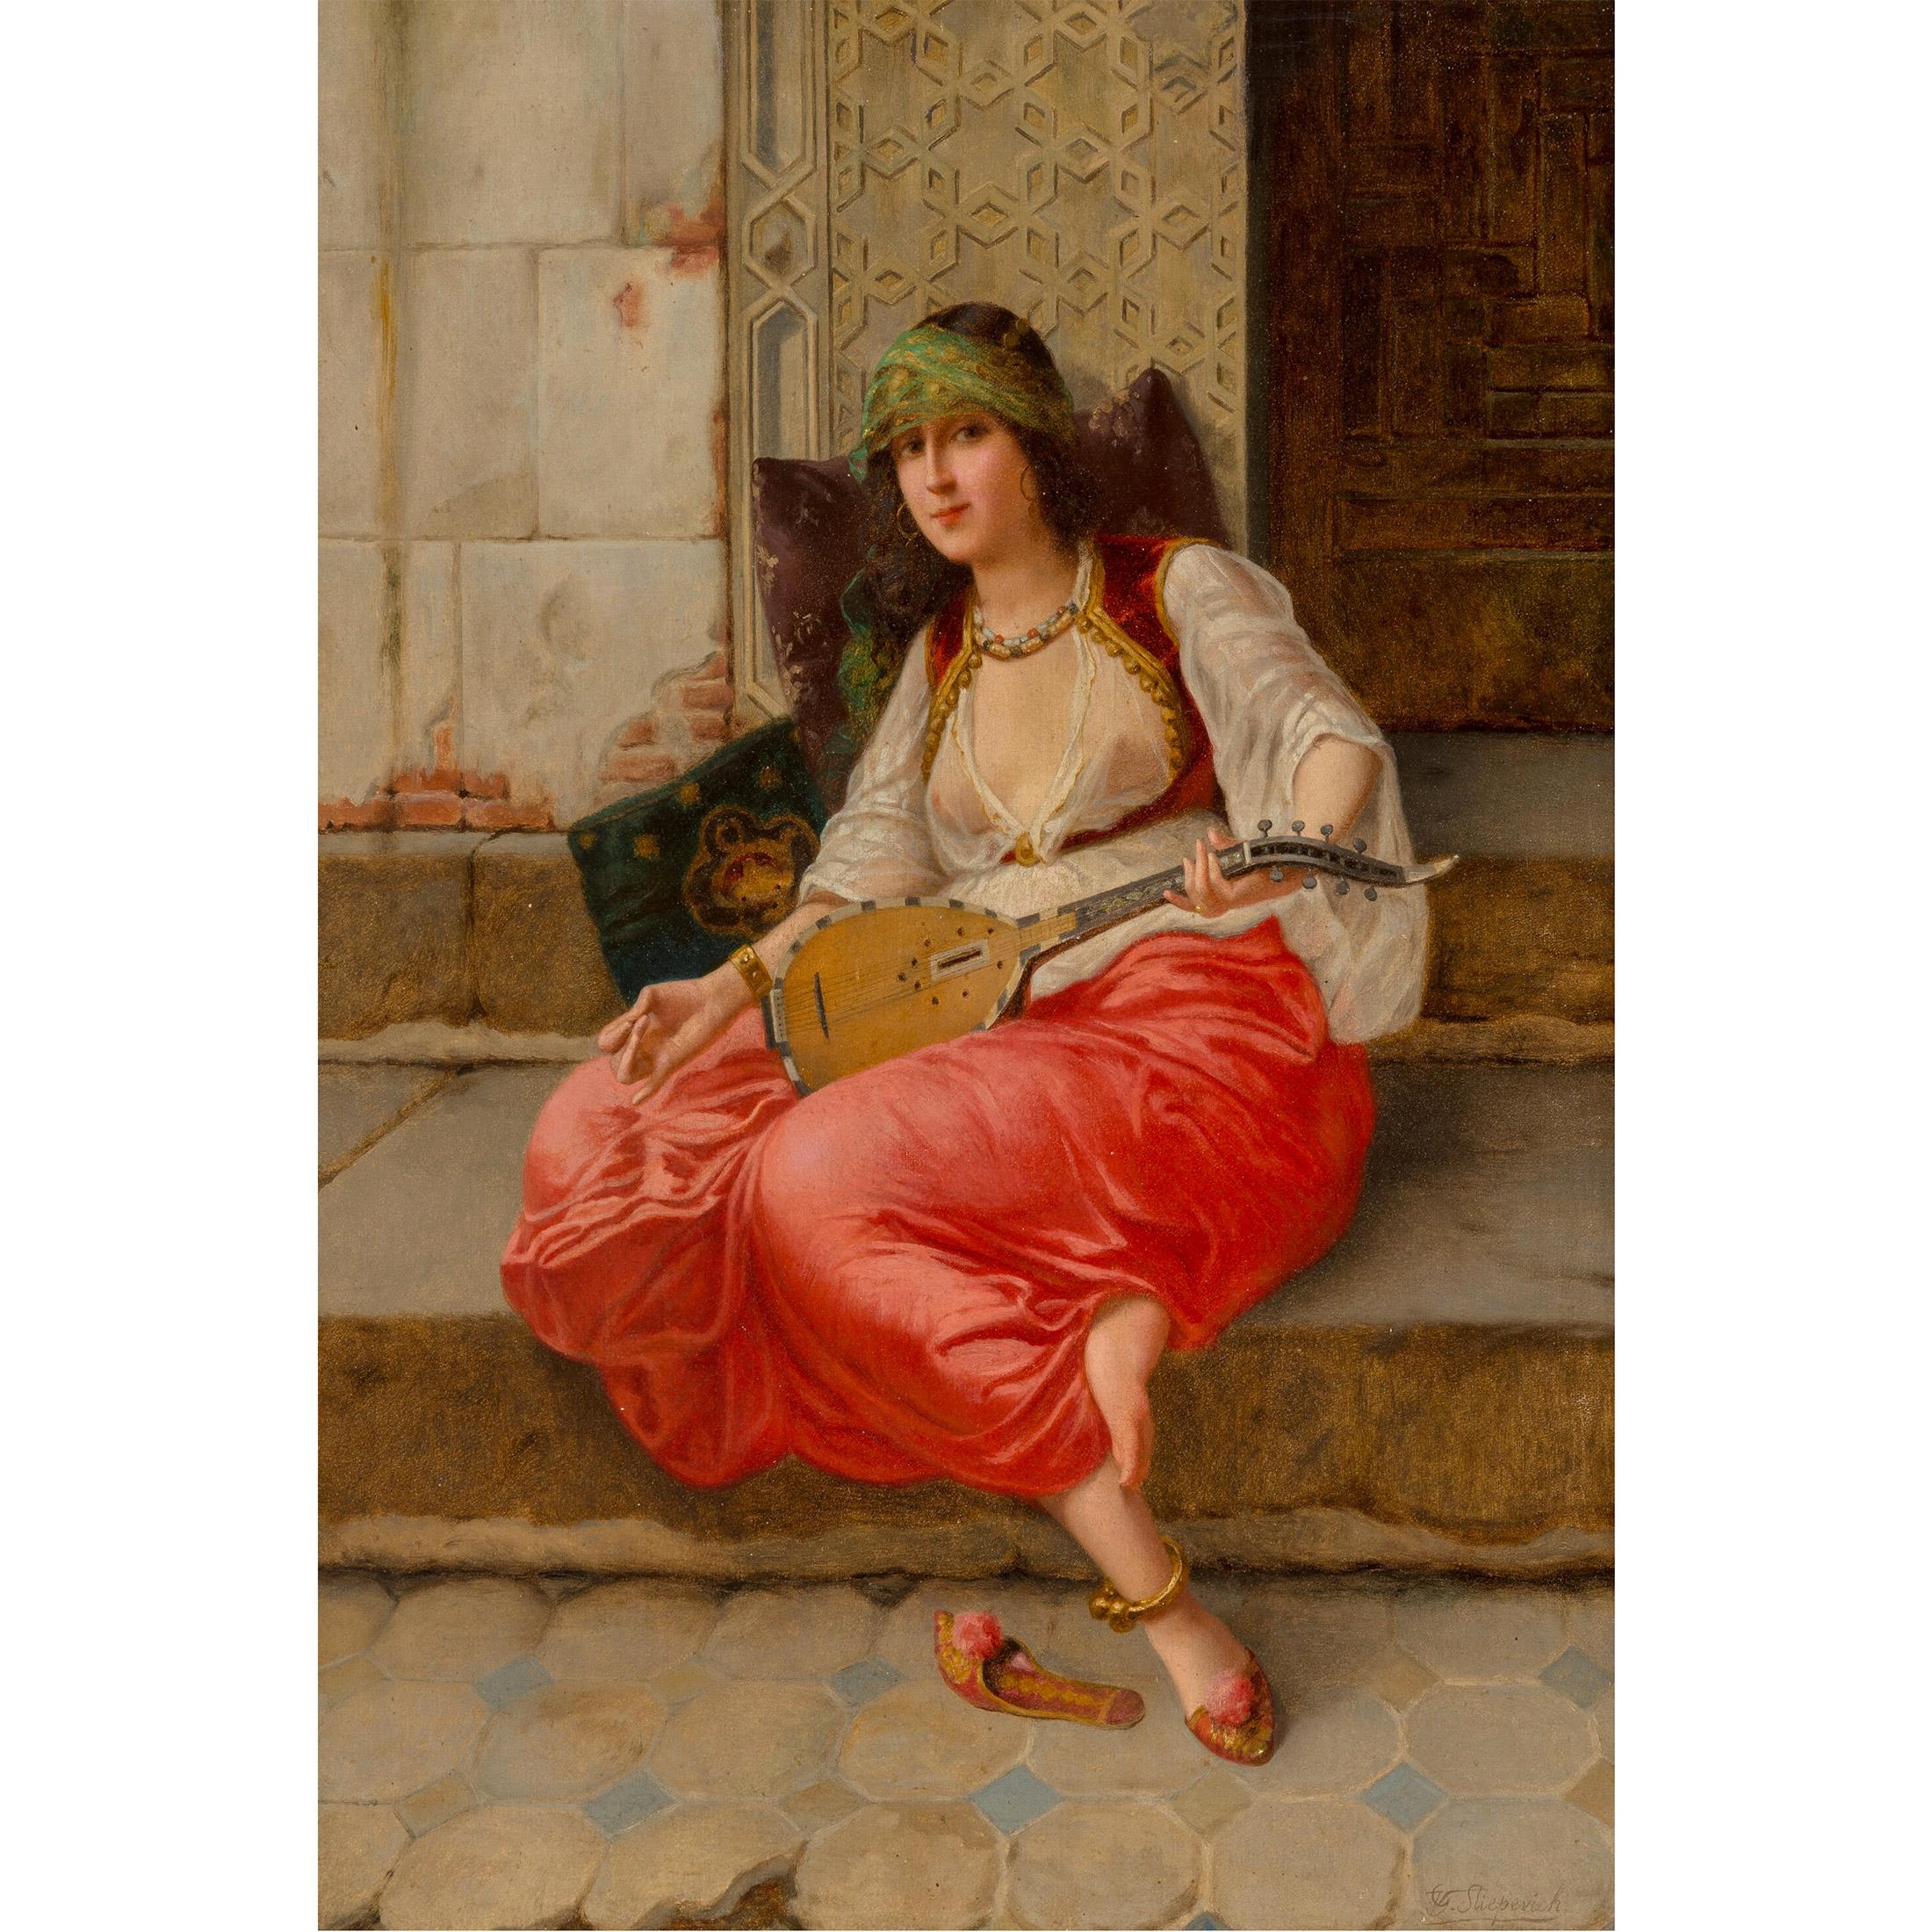 Vincent G. Stiepevich Portrait Painting - A Fine Stiepevich Orientalist Painting of a Harem Girl with a Lute